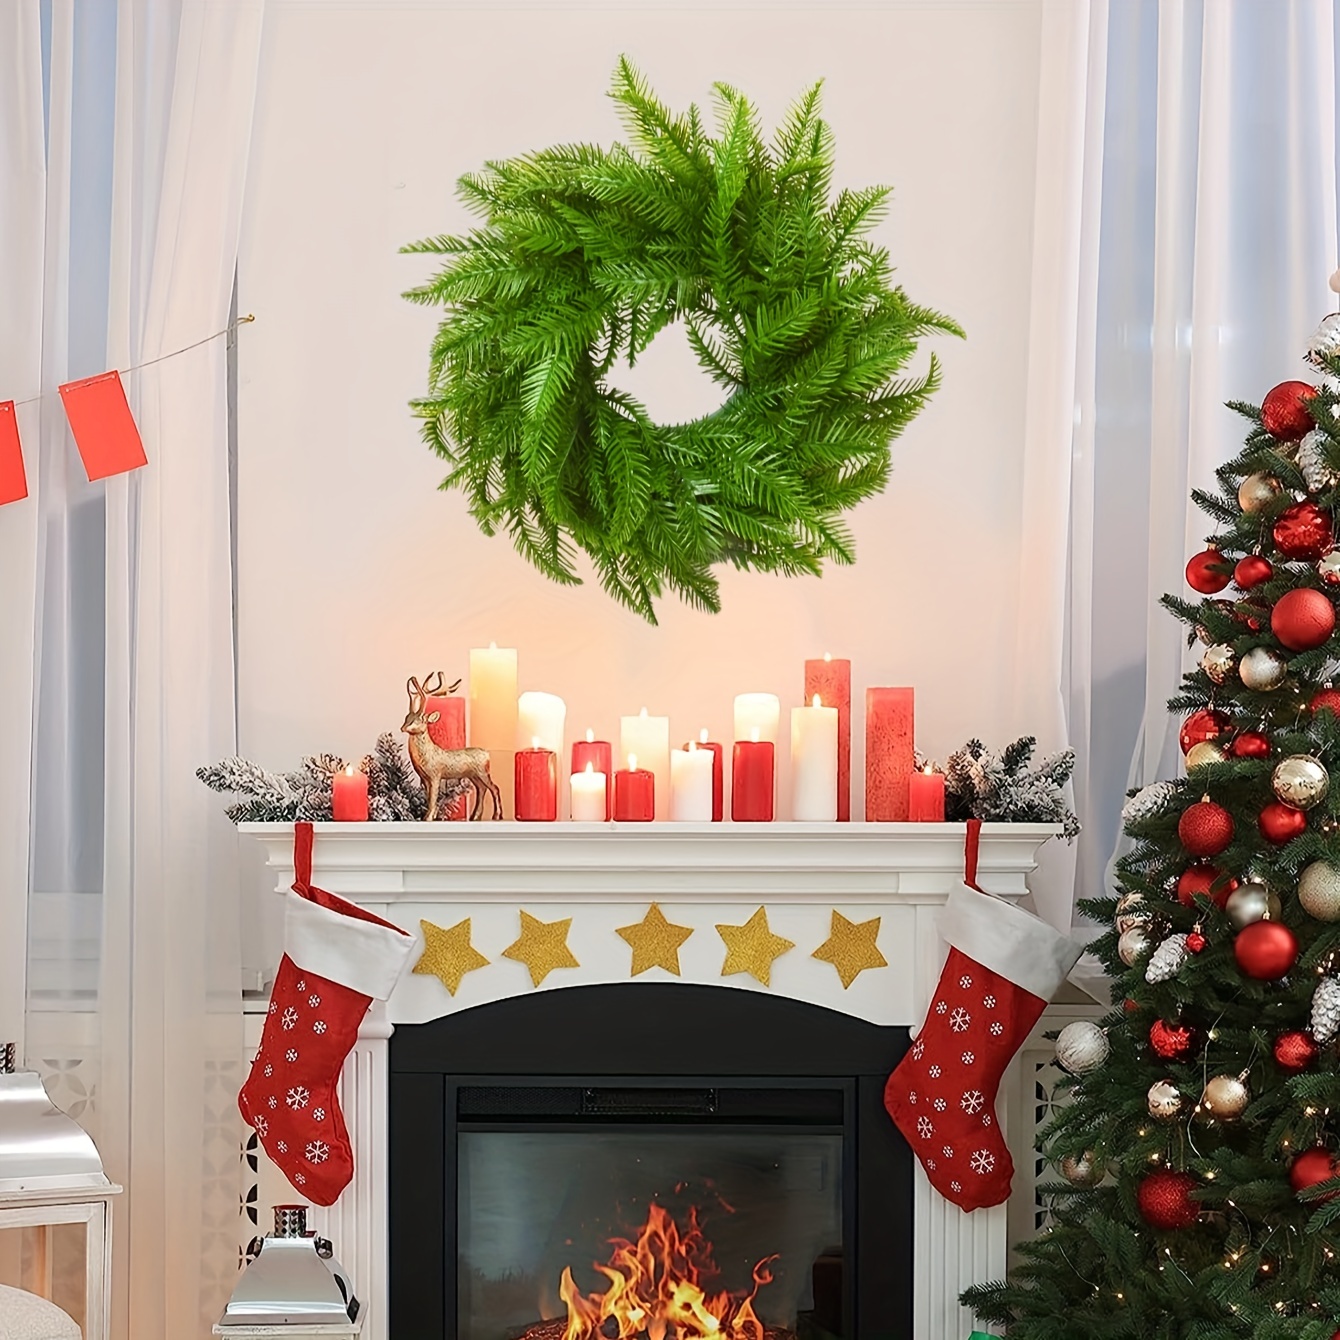 1pc artificial green pine needle wreath suitable for christmas decor plastic simulation green plant for family door front fireplace hanging indoor and outdoor christmas decorations